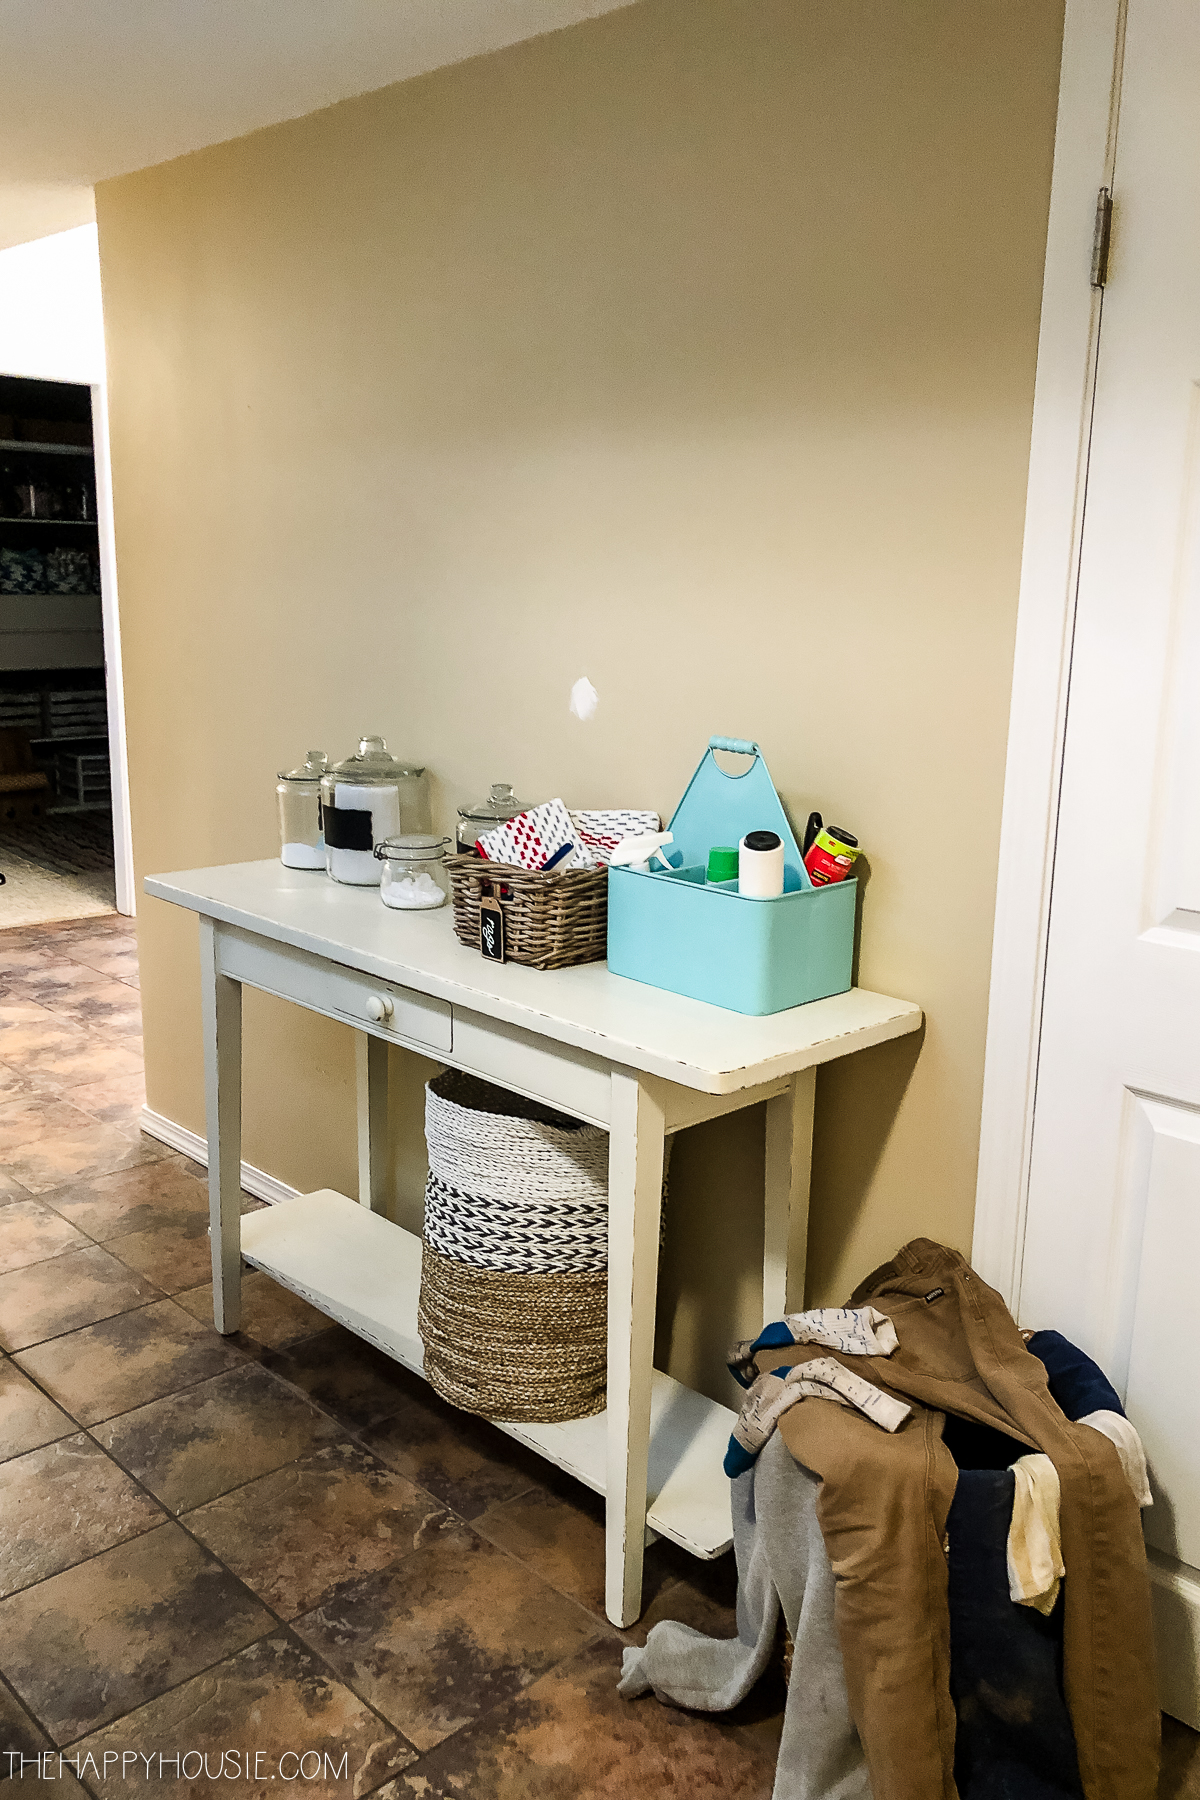 A small hallway table with laundry items on it.